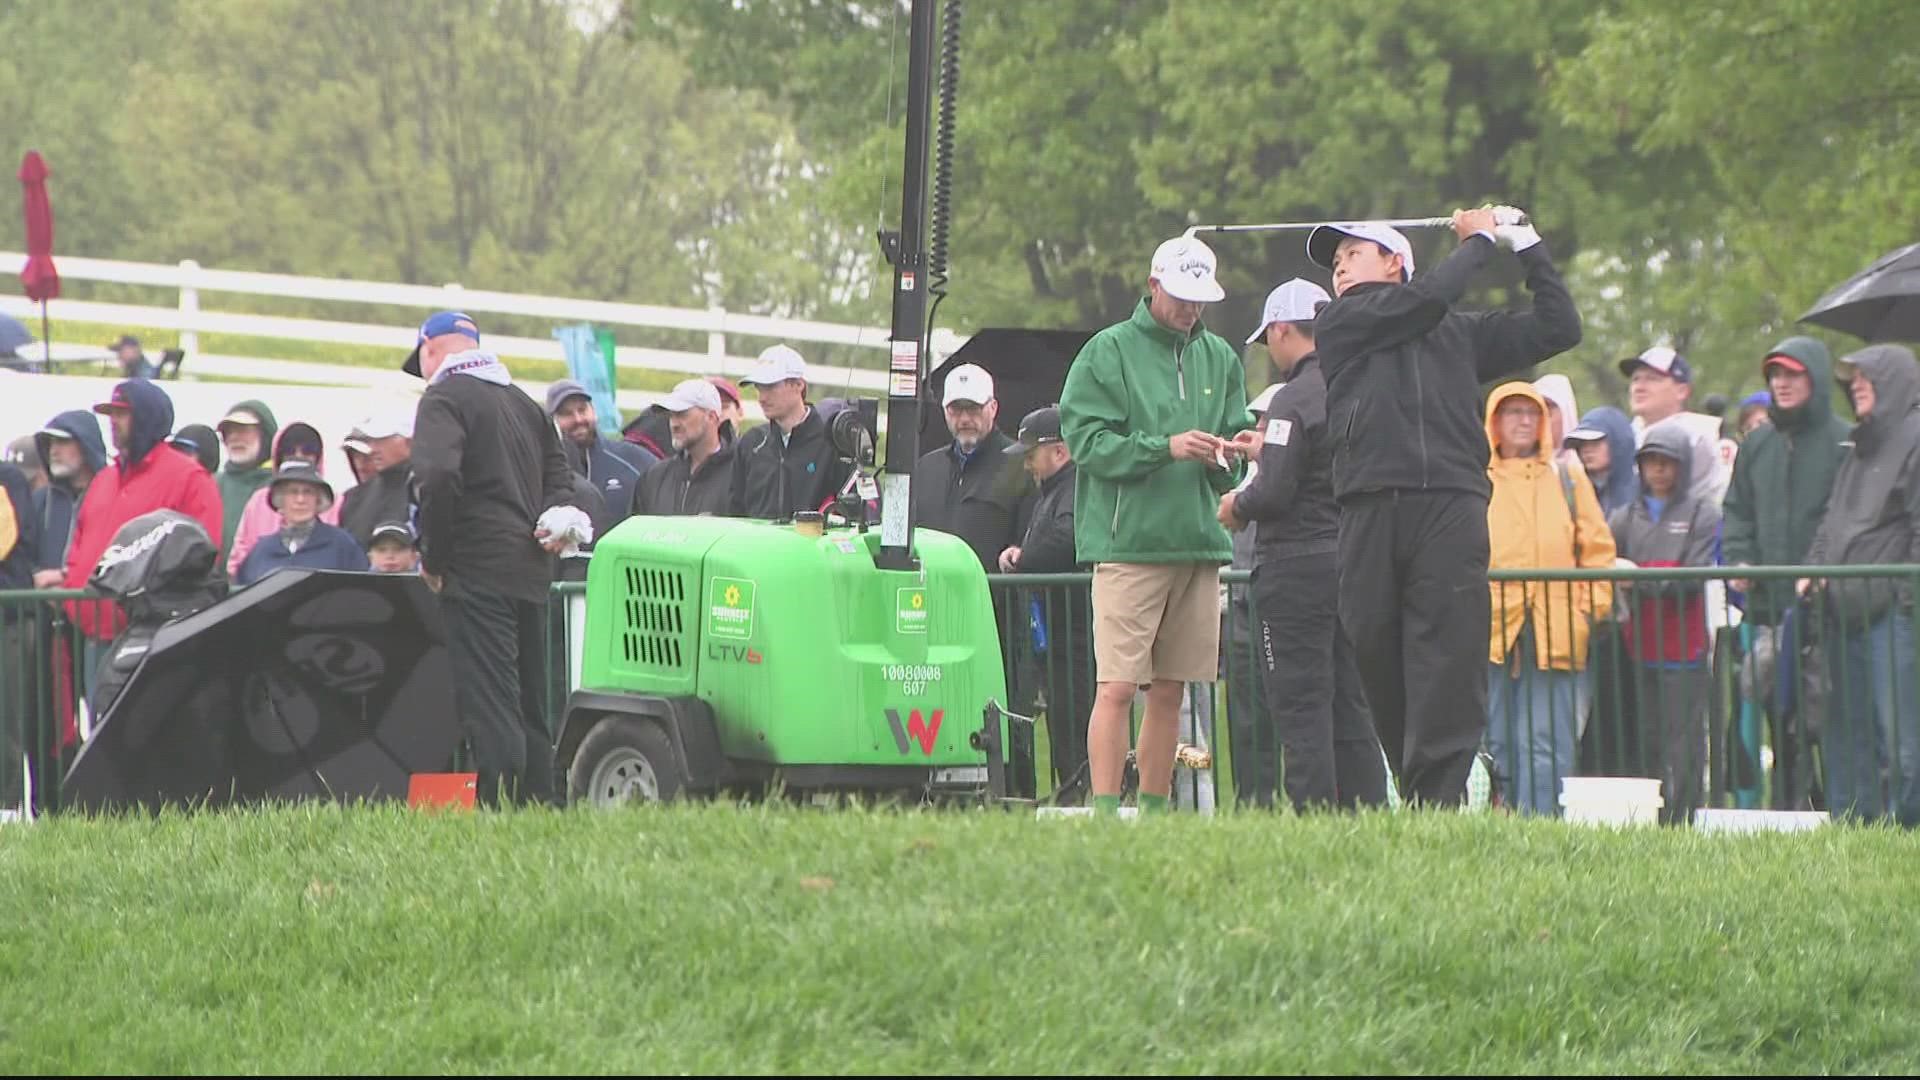 Players turned out for Round 3 in more rain on Saturday at TPC Potomac at Avenel Farm in Maryland on Saturday. WUSA9 is a sponsor of the 2022 championship.